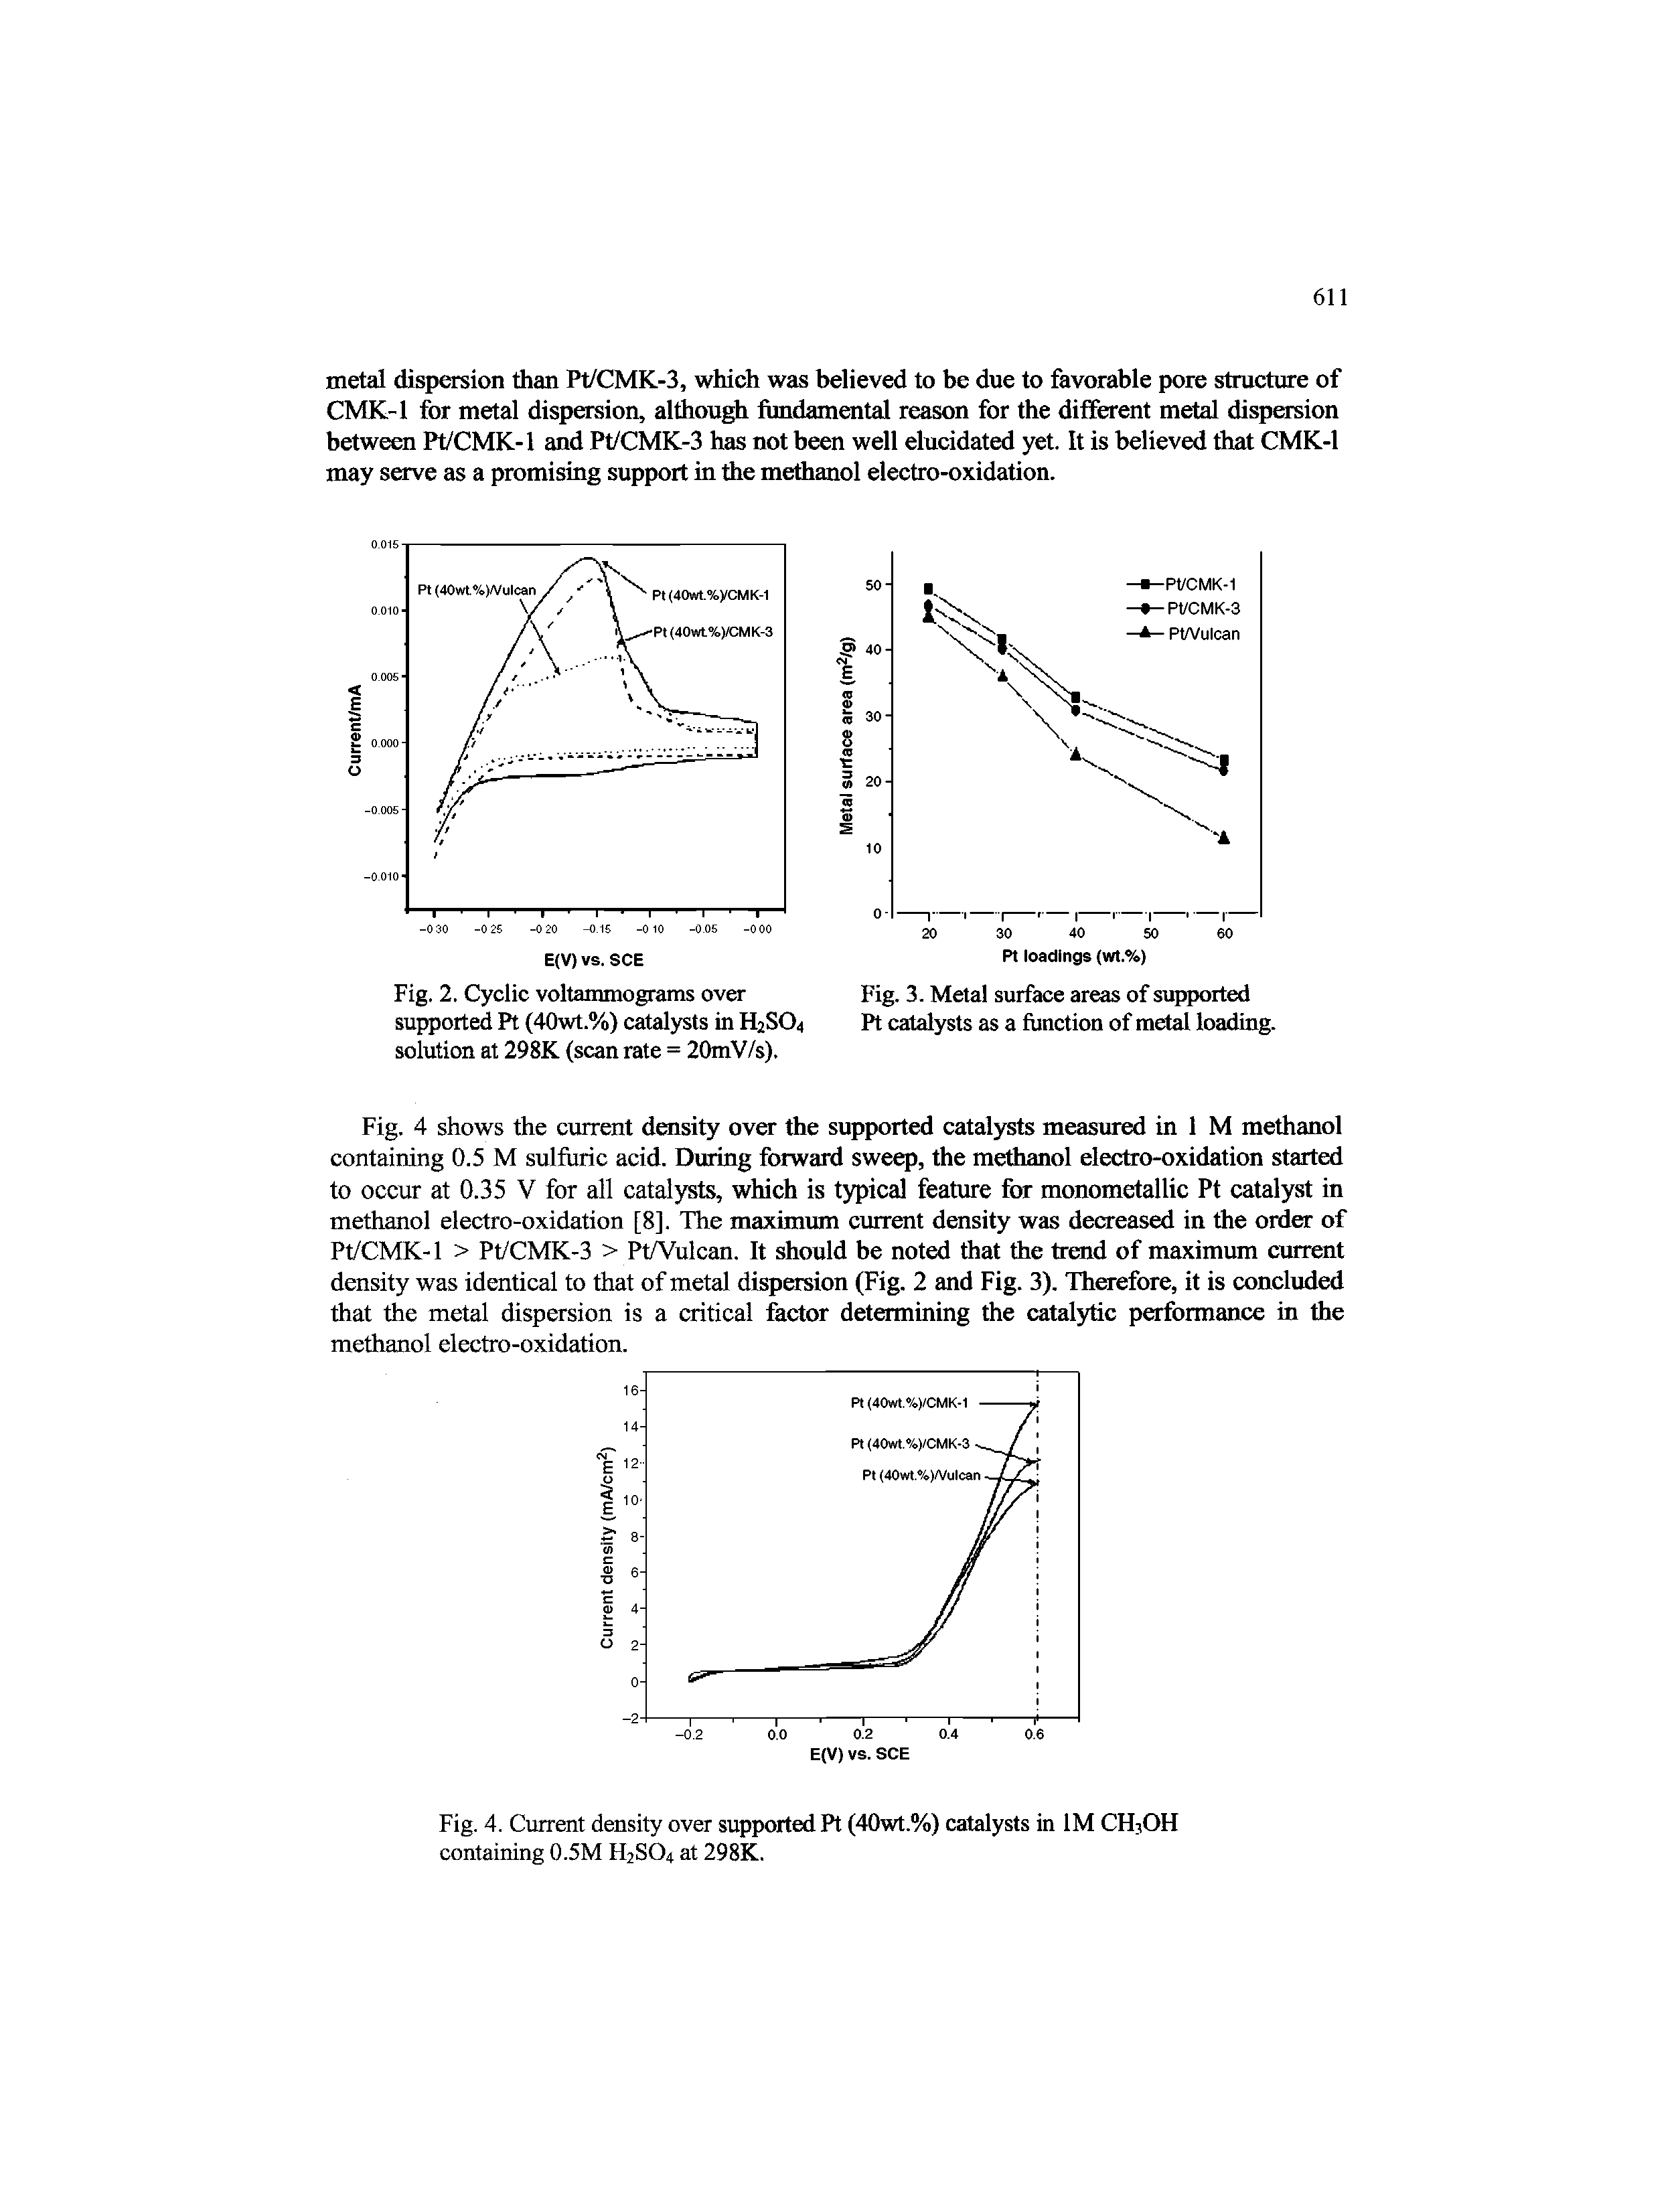 Fig. 4 shows the current density over the supported catalysts measured in 1 M methanol containing 0.5 M sulfuric acid. During forward sweep, the methanol electro-oxidation started to occur at 0.35 V for all catalysts, which is typical feature for monometallic Pt catalyst in methanol electro-oxidation [8]. The maximum current density was decreased in the order of Pt/CMK-1 > Pt/CMK-3 > Pt/Vulcan. It should be noted that the trend of maximum current density was identical to that of metal dispersion (Fig. 2 and Fig. 3). Therefore, it is concluded that the metal dispersion is a critical factor determining the catalytic performance in the methanol electro-oxidation.